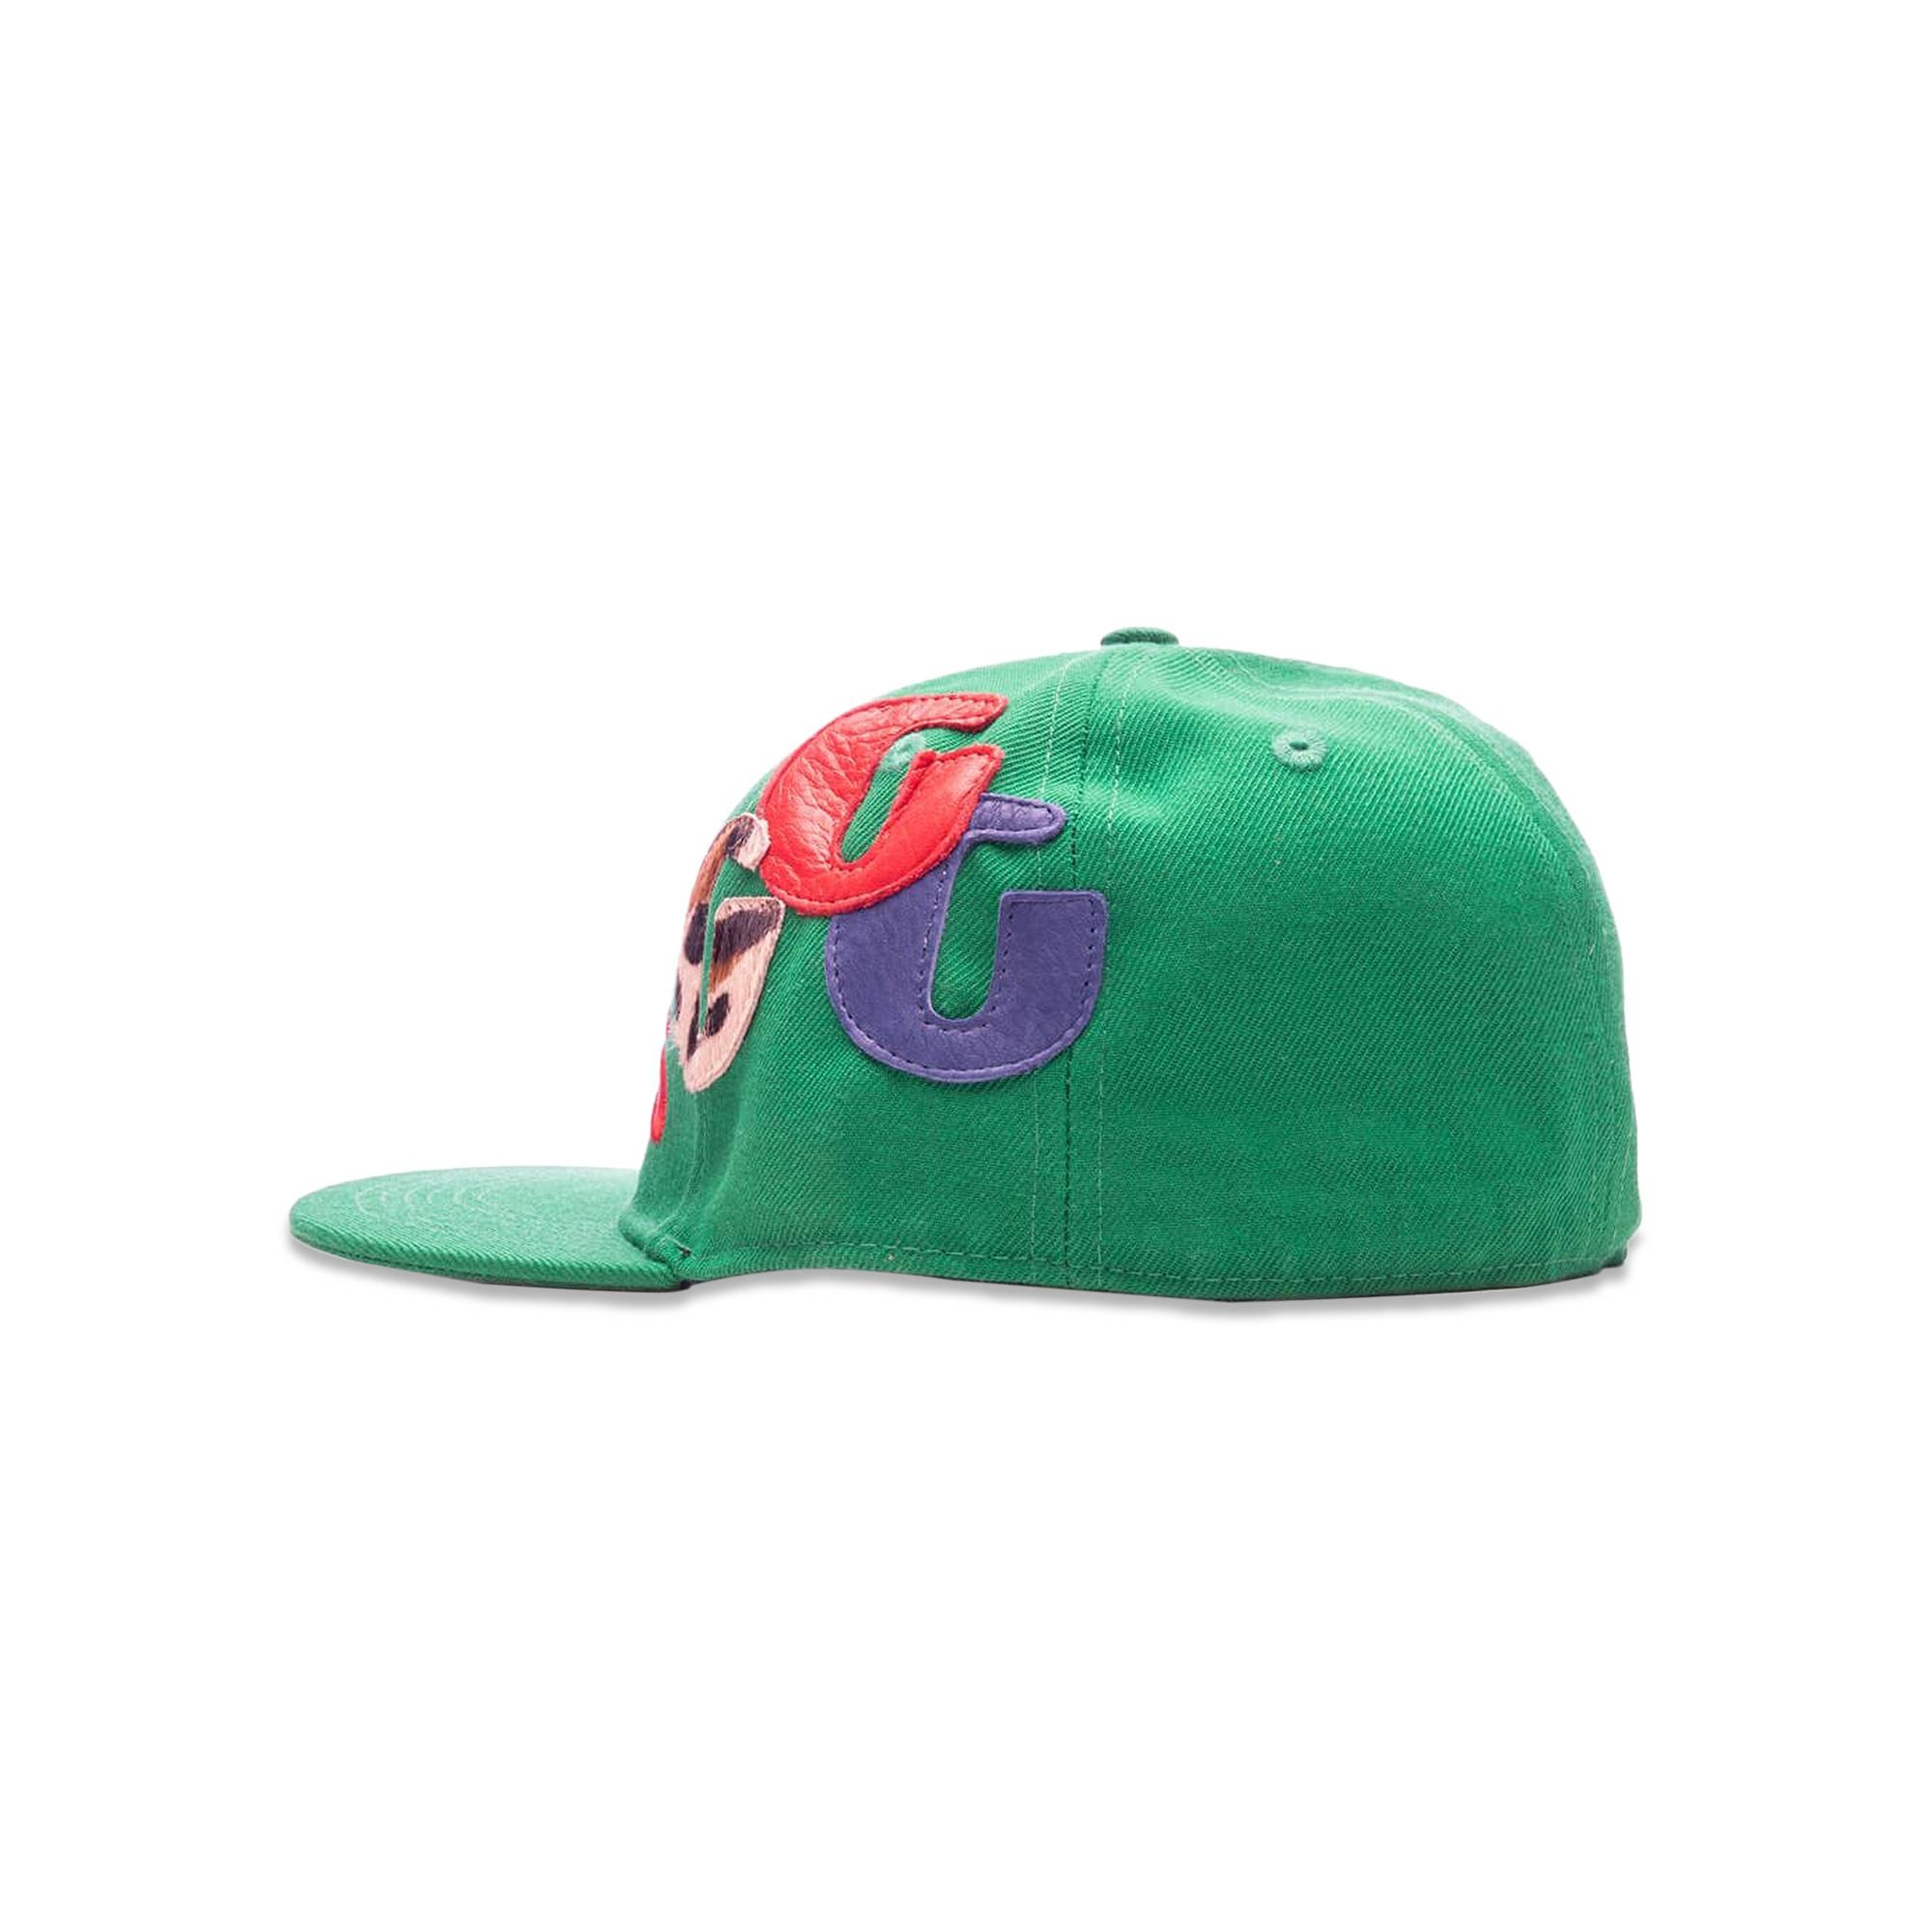 Gallery Dept. ATK G Patch Fitted Cap 'Green' - 2